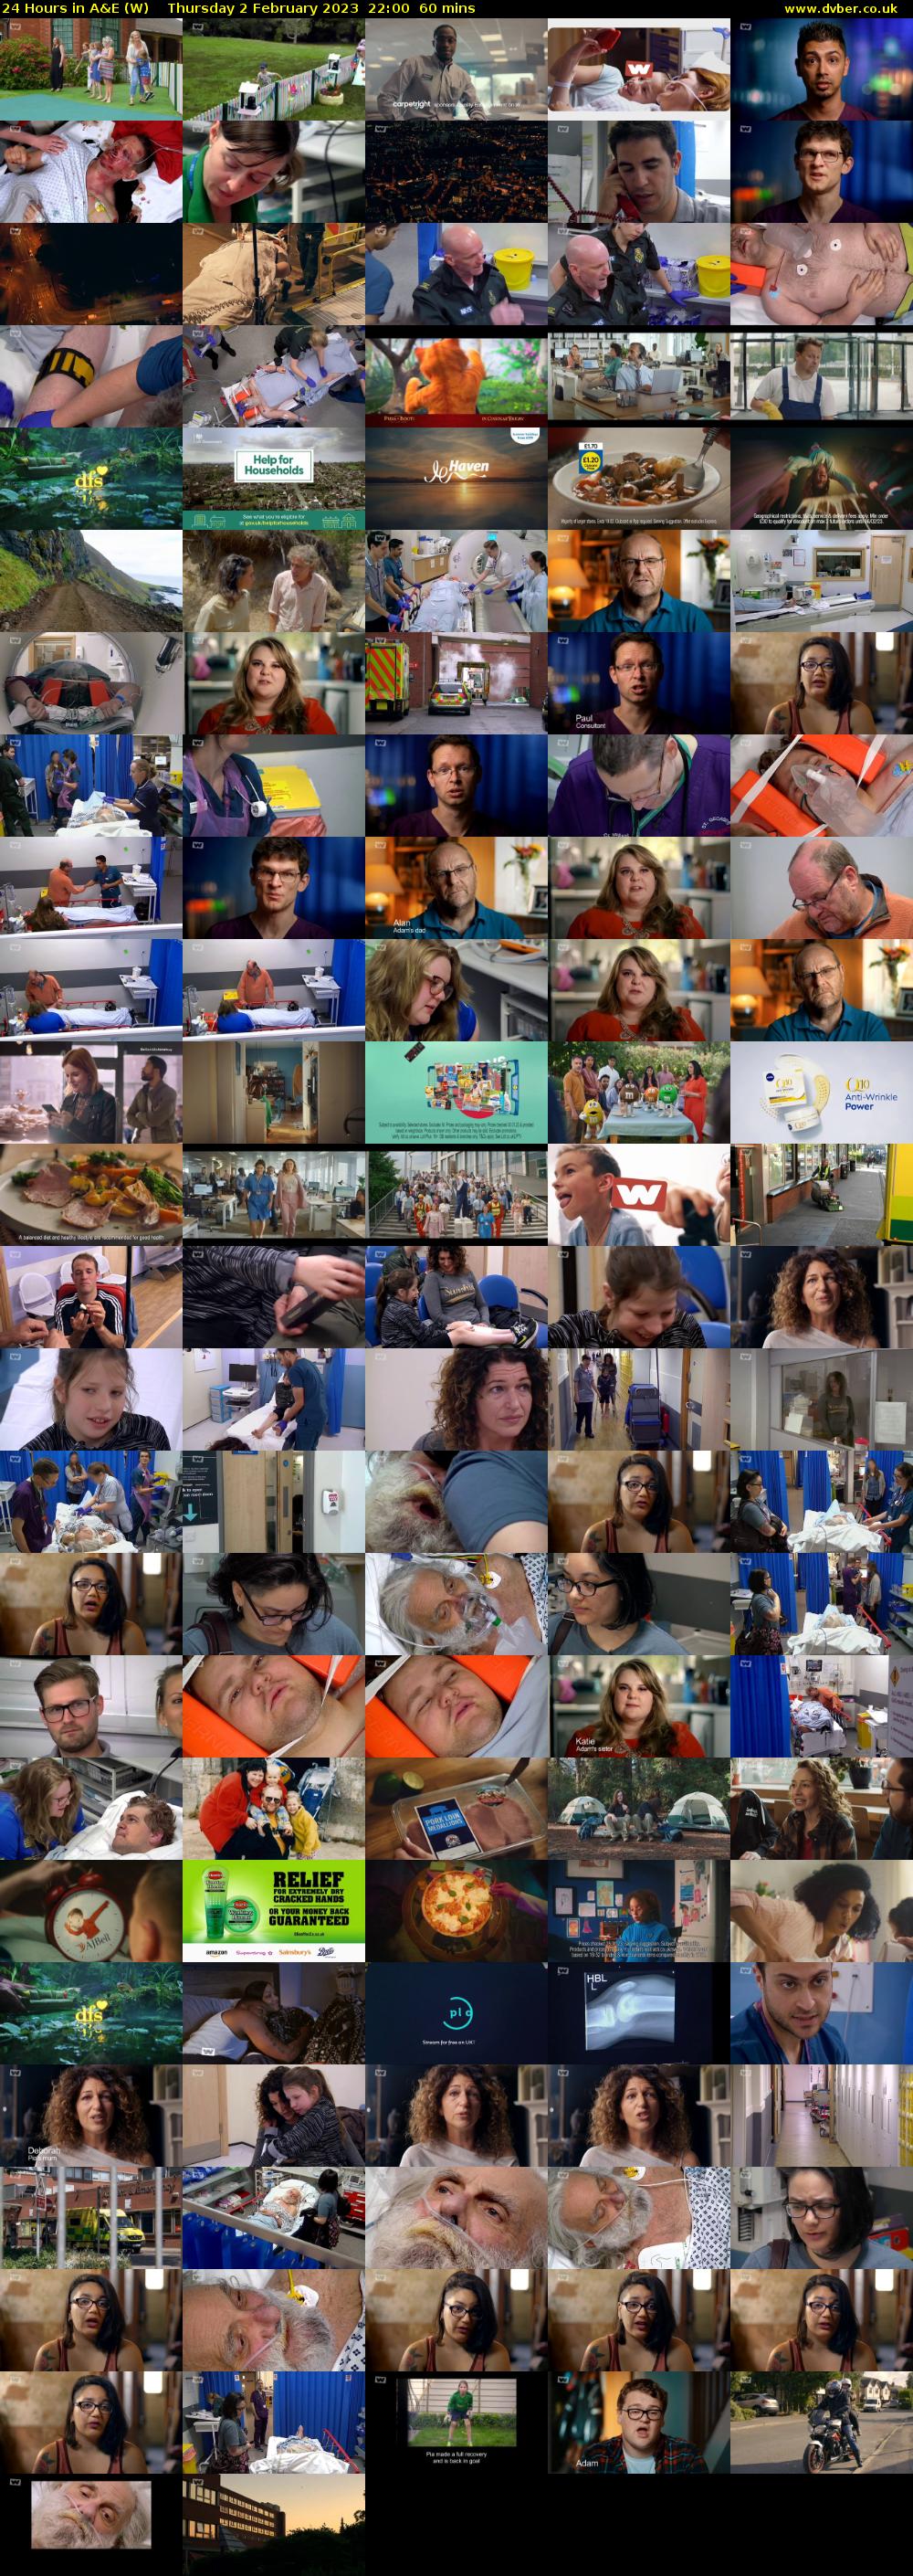 24 Hours in A&E (W) Thursday 2 February 2023 22:00 - 23:00